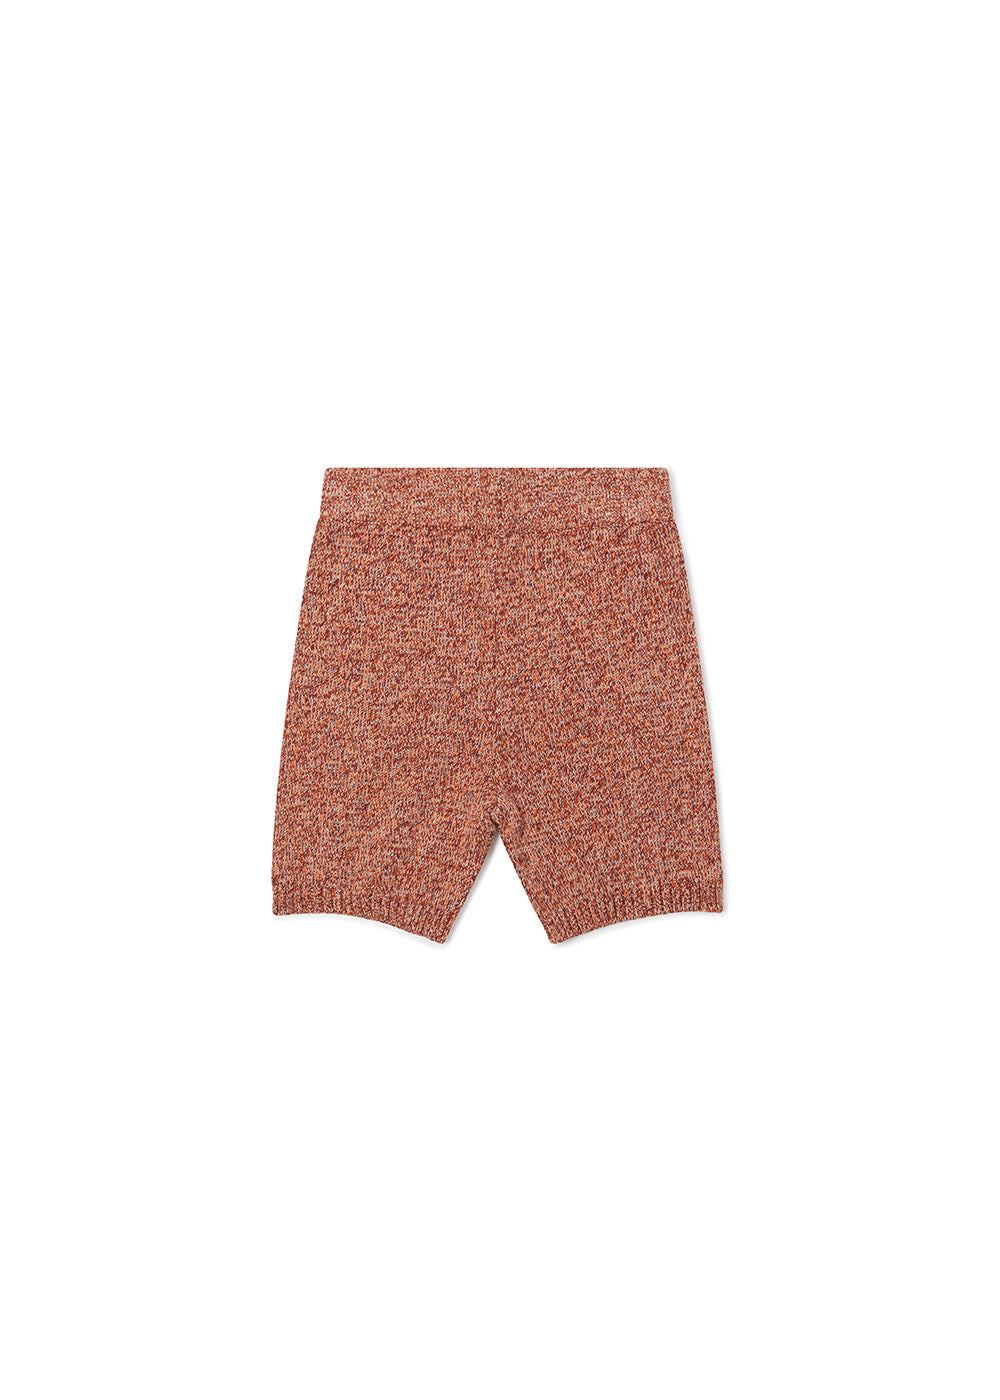 York Knitted Shorts - 4Y-6Y / Mixed Orange Brown